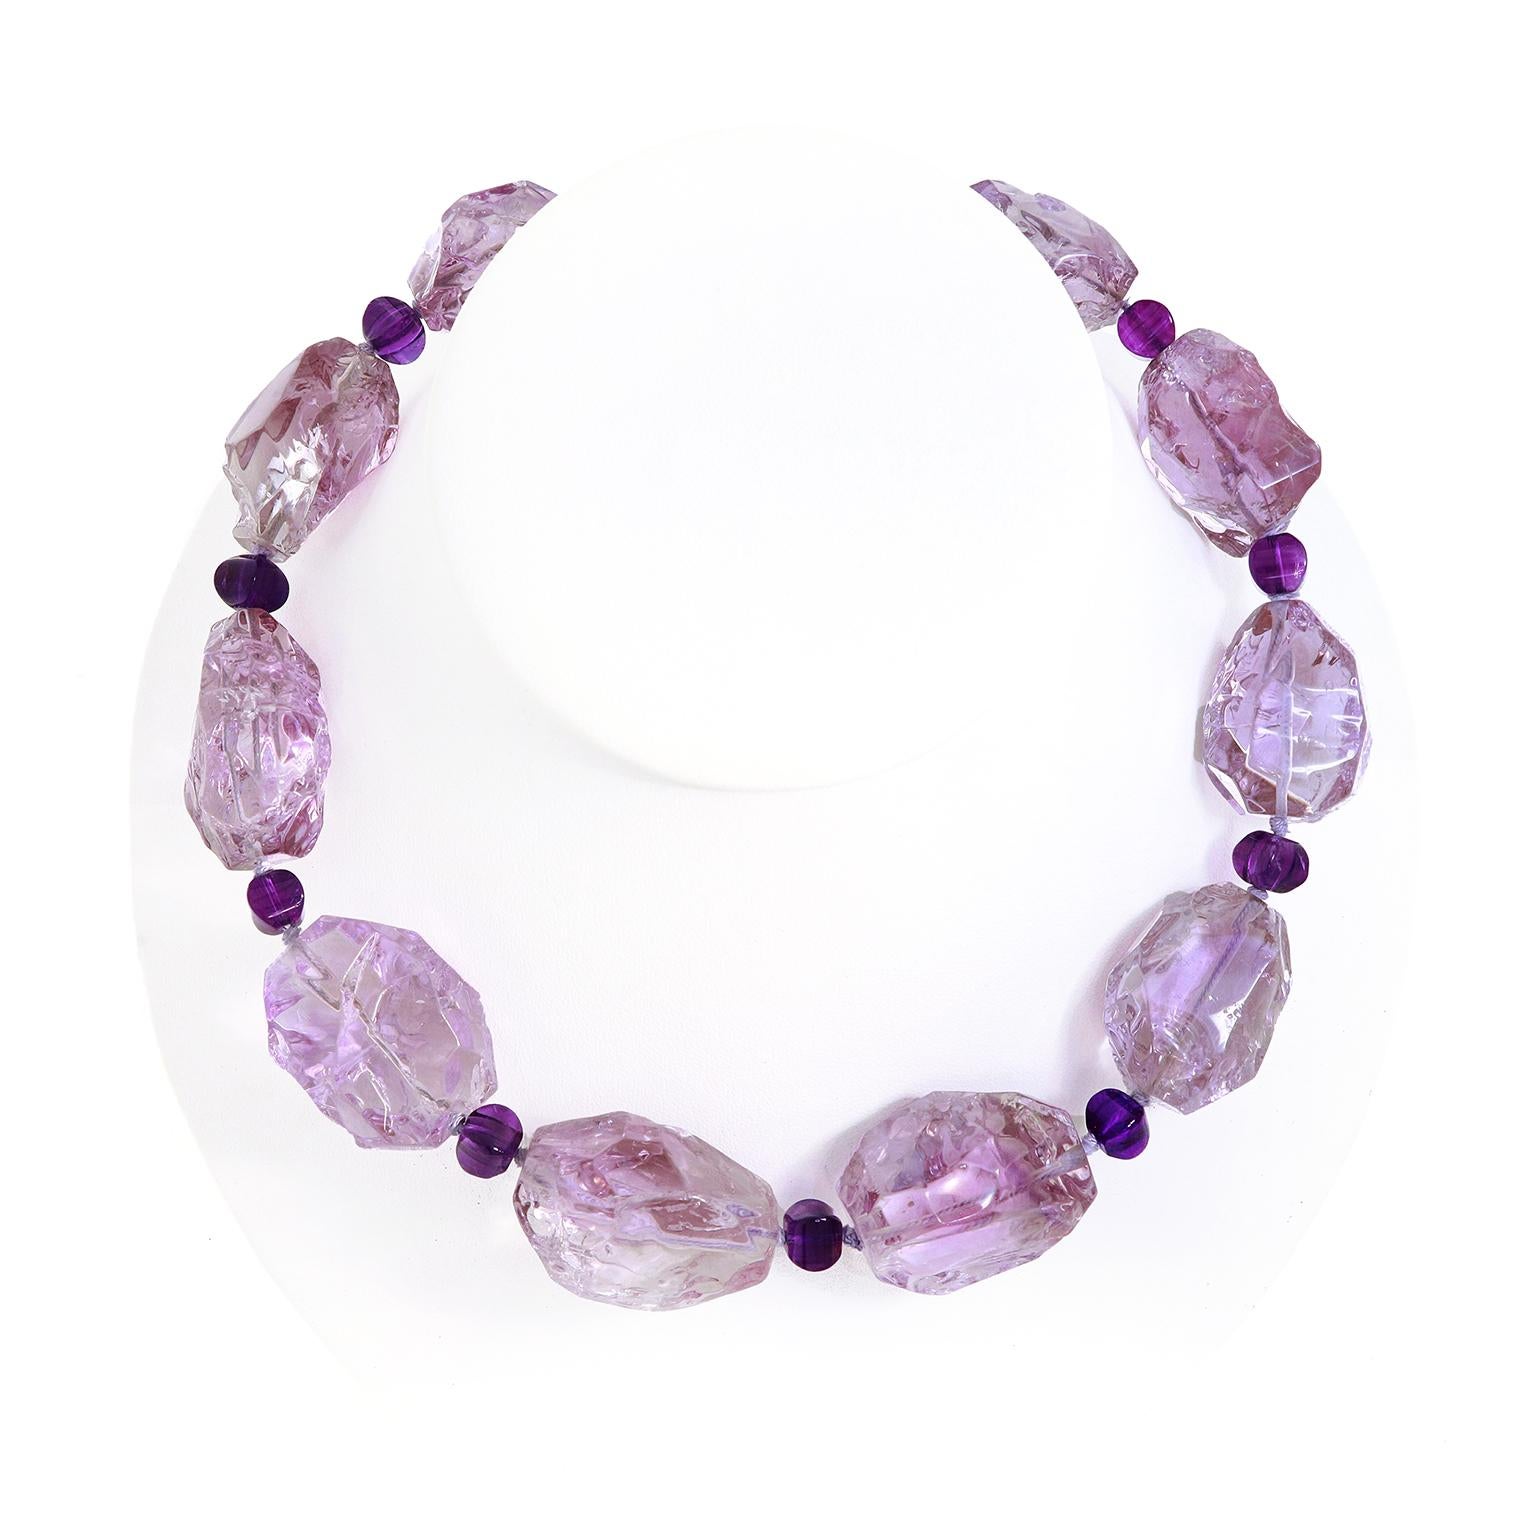 The beauty of amethyst revolves in this necklace. A crystalline display of lilac and violet sparkles in boulder shapes of the gem as the focus. In between each boulder is an accent of a single roundel of the gem in a deeper hue. The collective